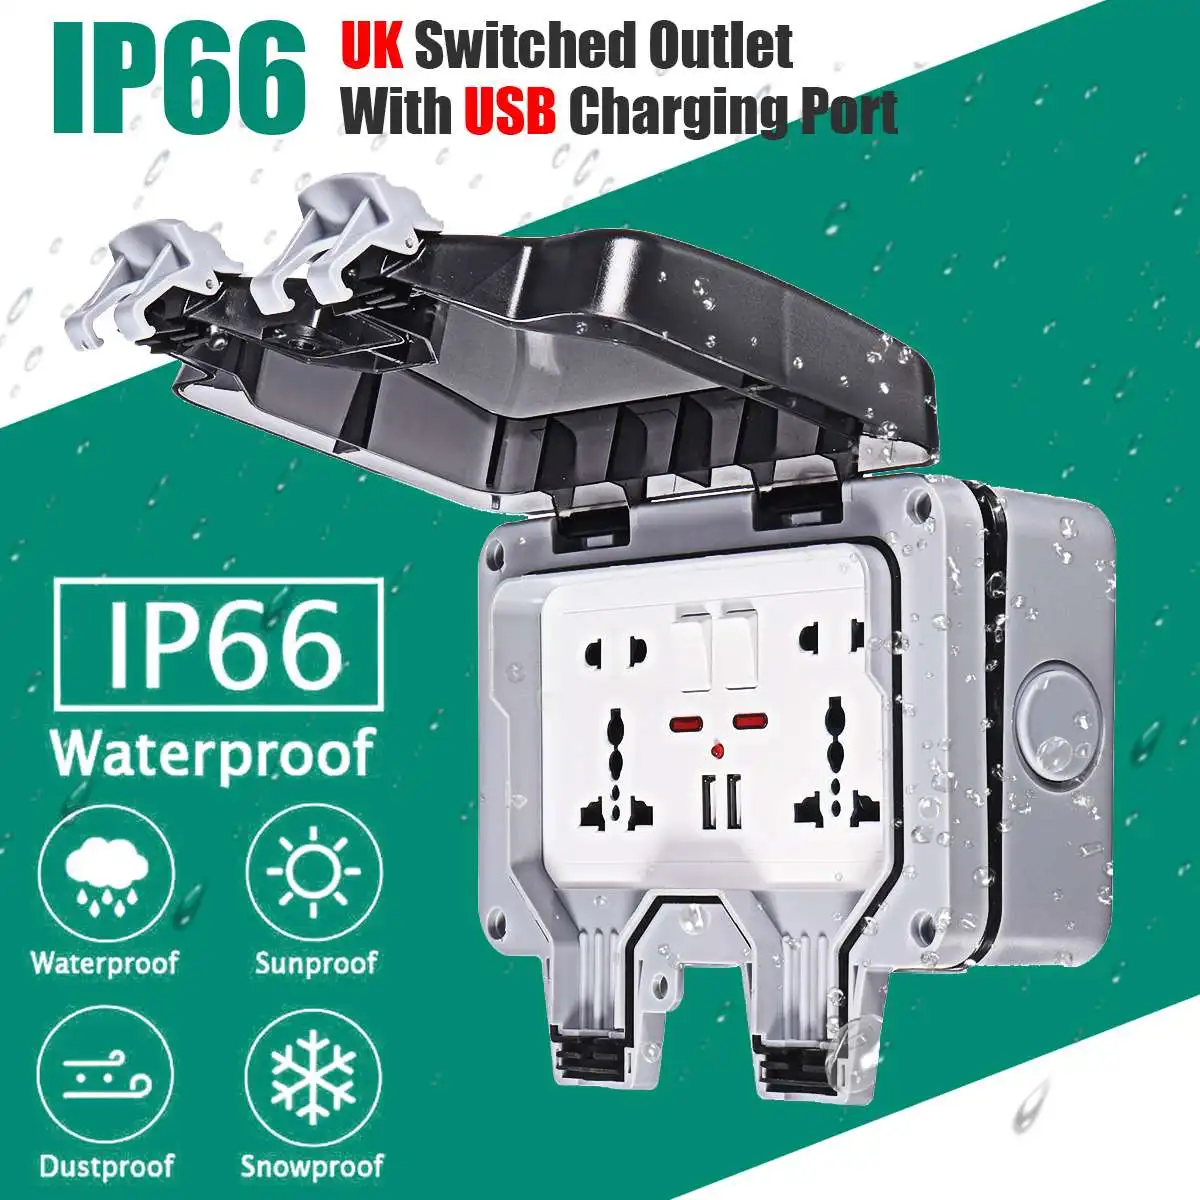 

IP66 Weatherproof Waterproof Outdoor BOX Wall Socket 13A Double Universal / UK Switched Outlet With USB Charging Port